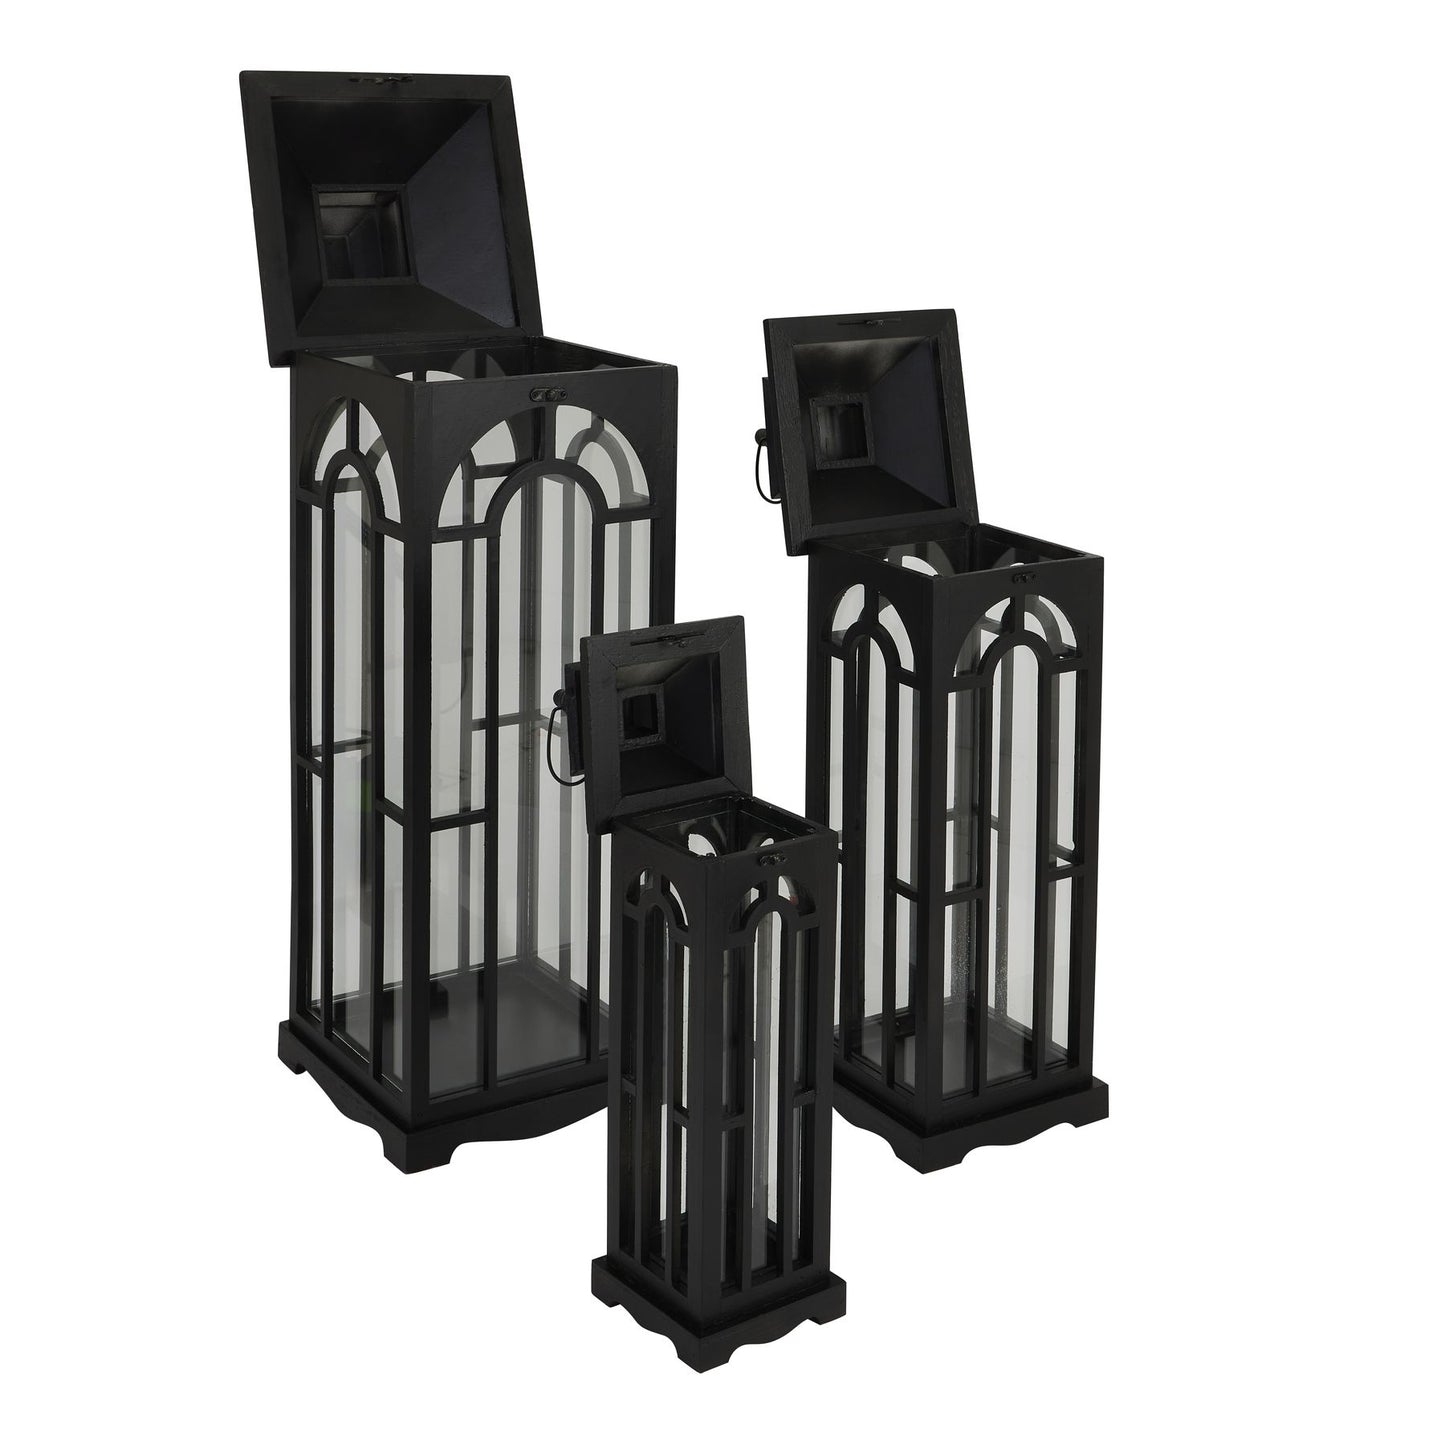 Set Of 3 Black Window Style Lanterns With Open Top